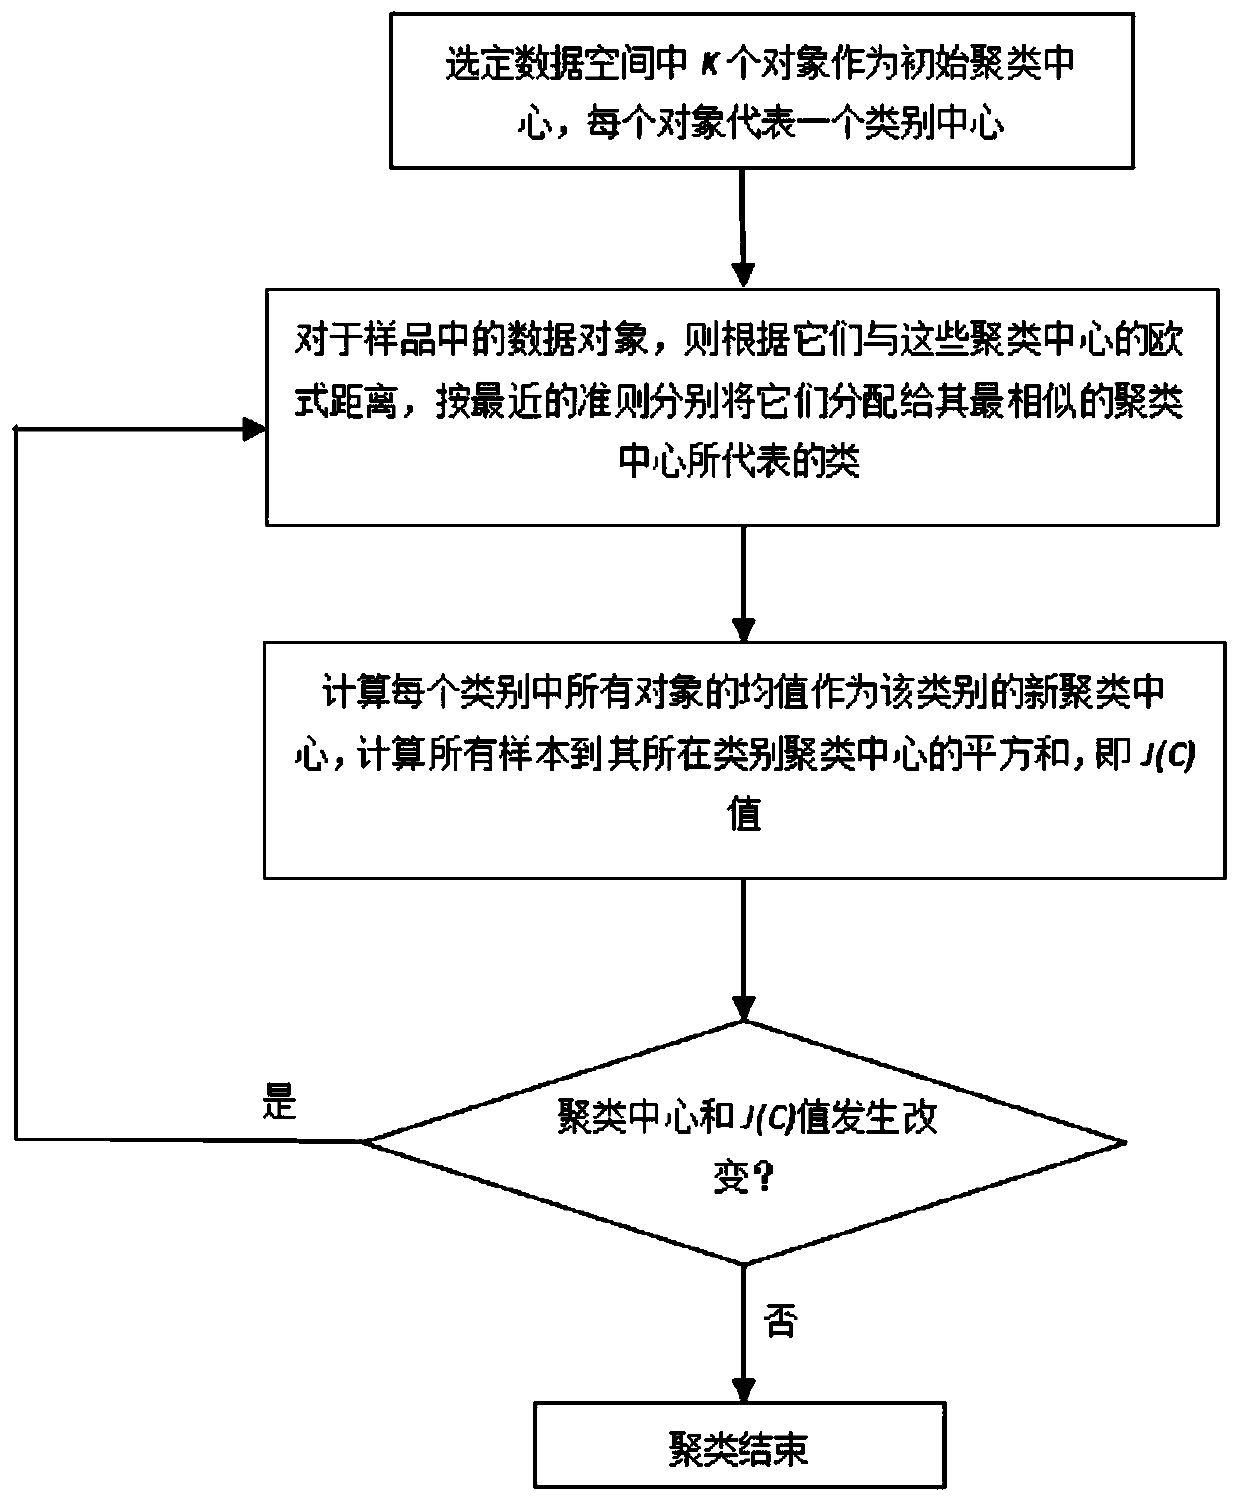 Multi-state system reliability assessment method based on Markov and universal generation function